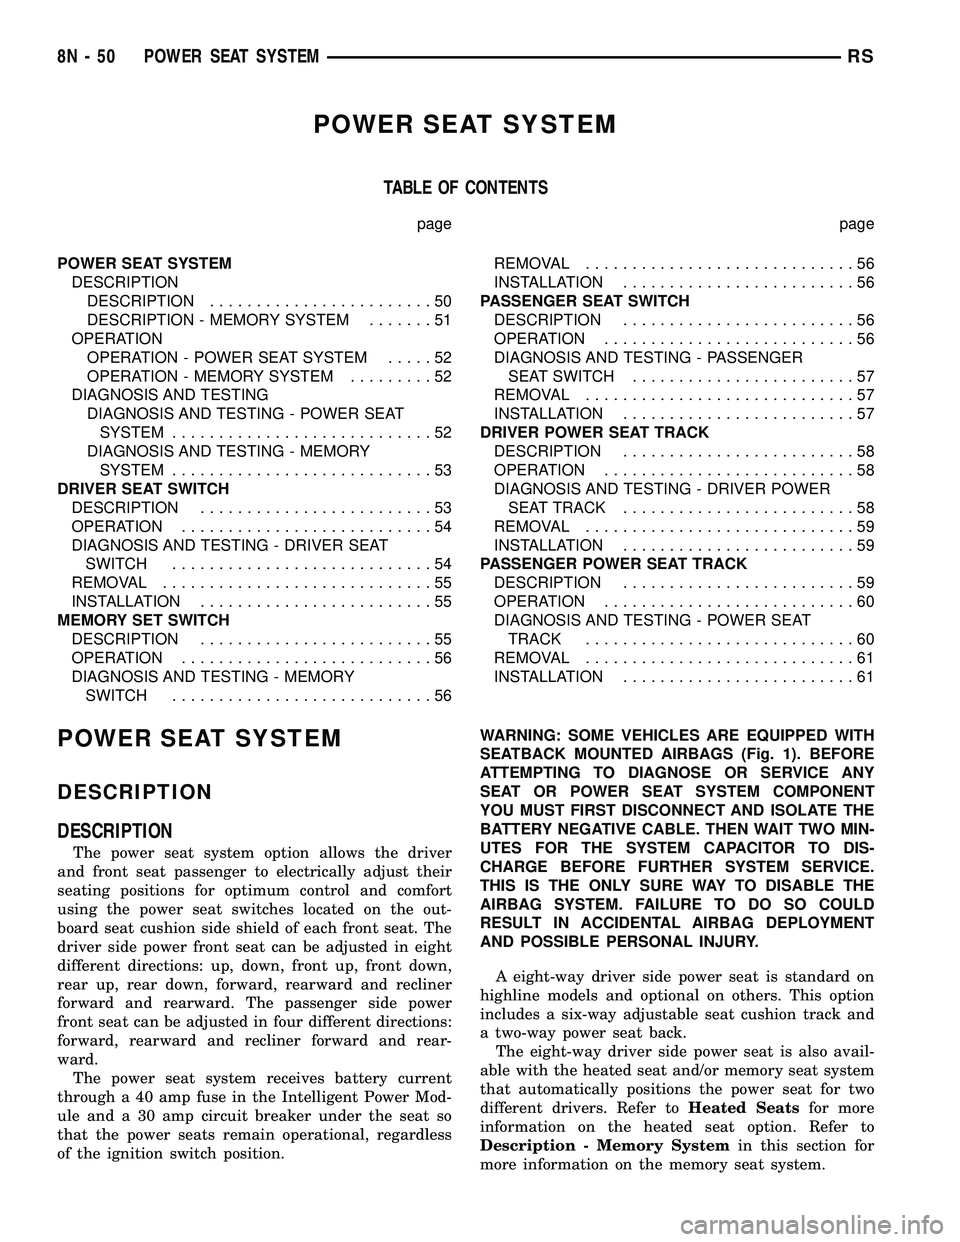 DODGE TOWN AND COUNTRY 2004  Service Manual POWER SEAT SYSTEM
TABLE OF CONTENTS
page page
POWER SEAT SYSTEM
DESCRIPTION
DESCRIPTION........................50
DESCRIPTION - MEMORY SYSTEM.......51
OPERATION
OPERATION - POWER SEAT SYSTEM.....52
OP